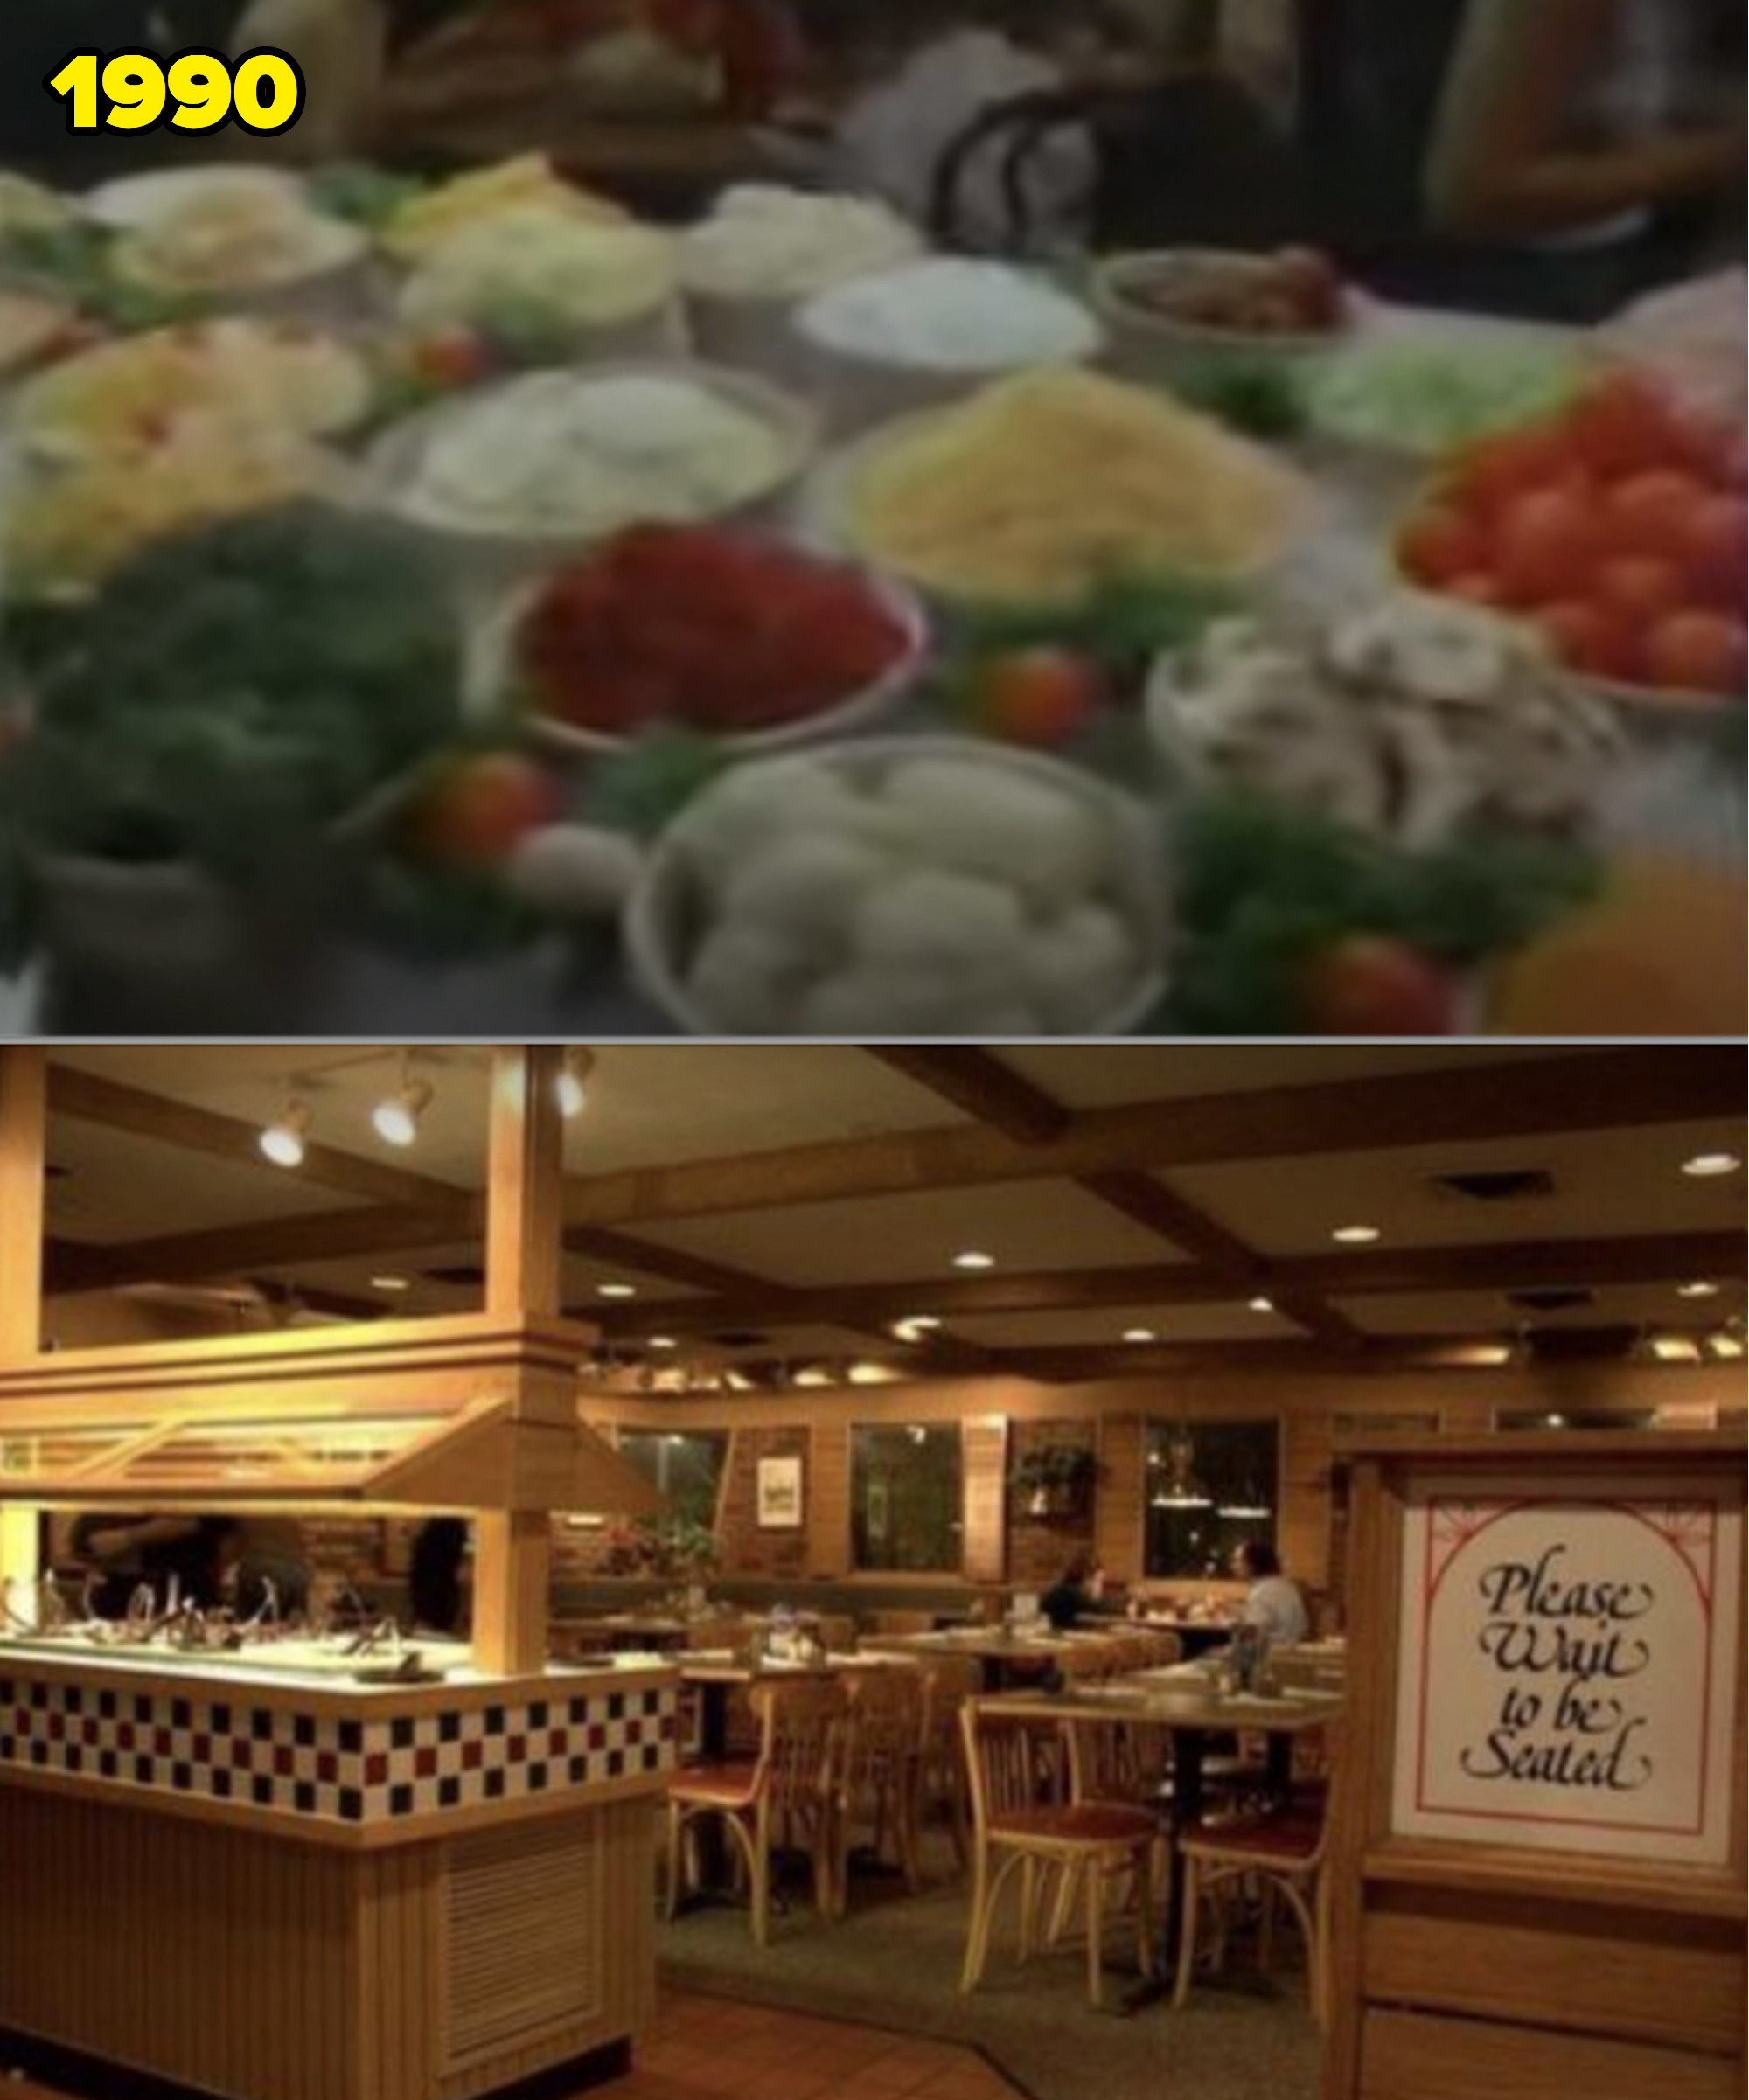 Screenshots from a 1990 Pizza Hut commercial, including their salad bar and dining area